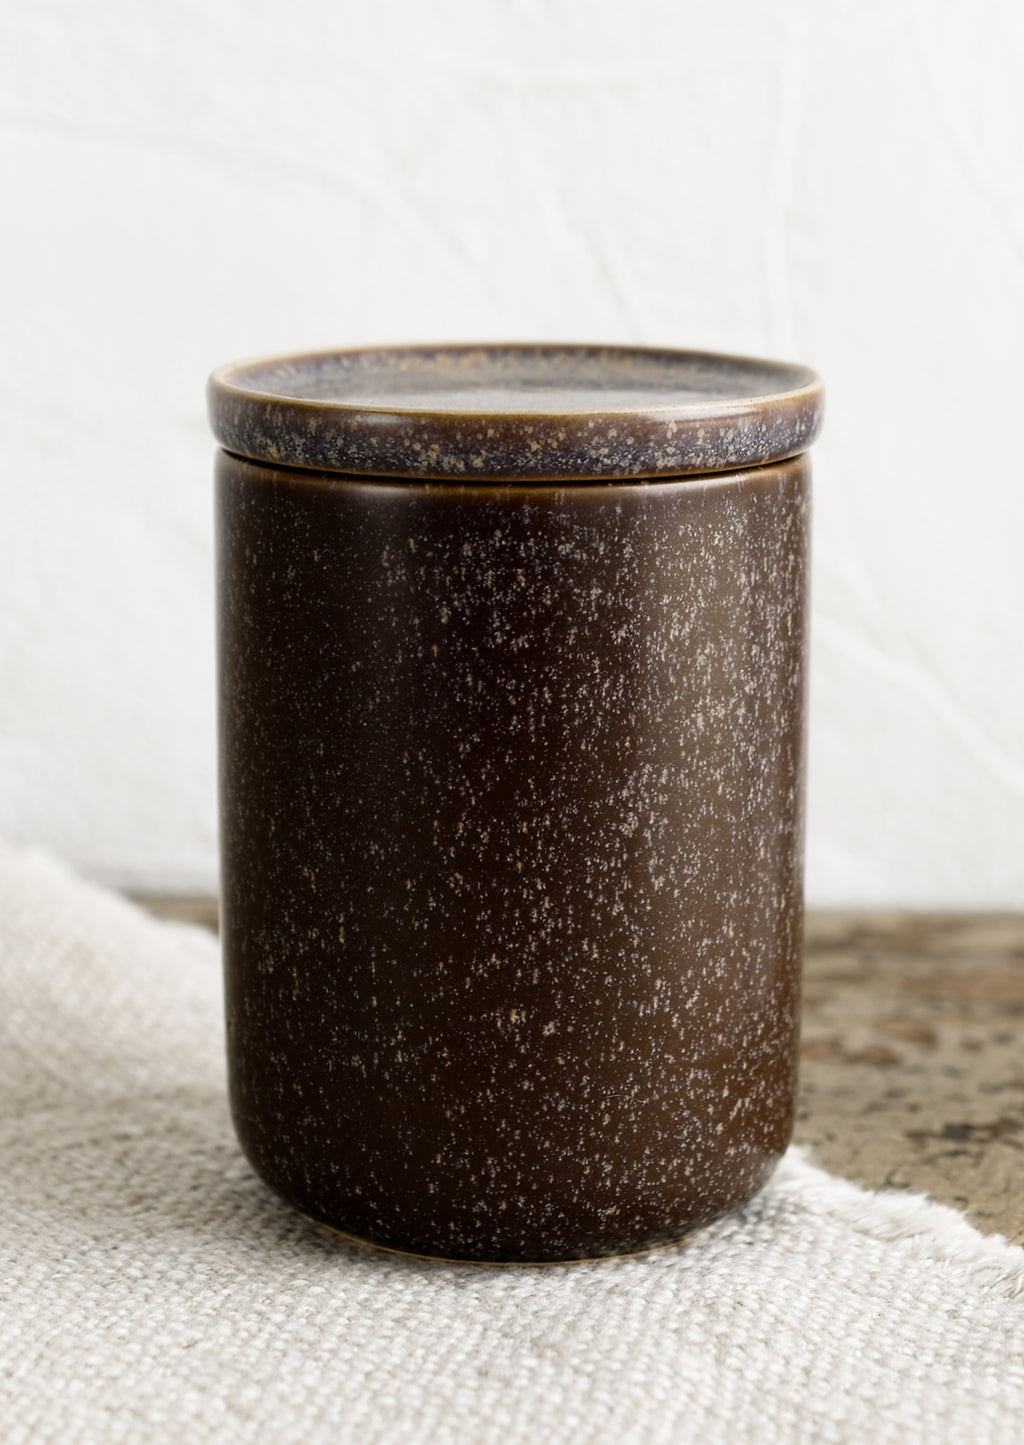 Cacao: Stoneware jars in shades of brown, with lid.